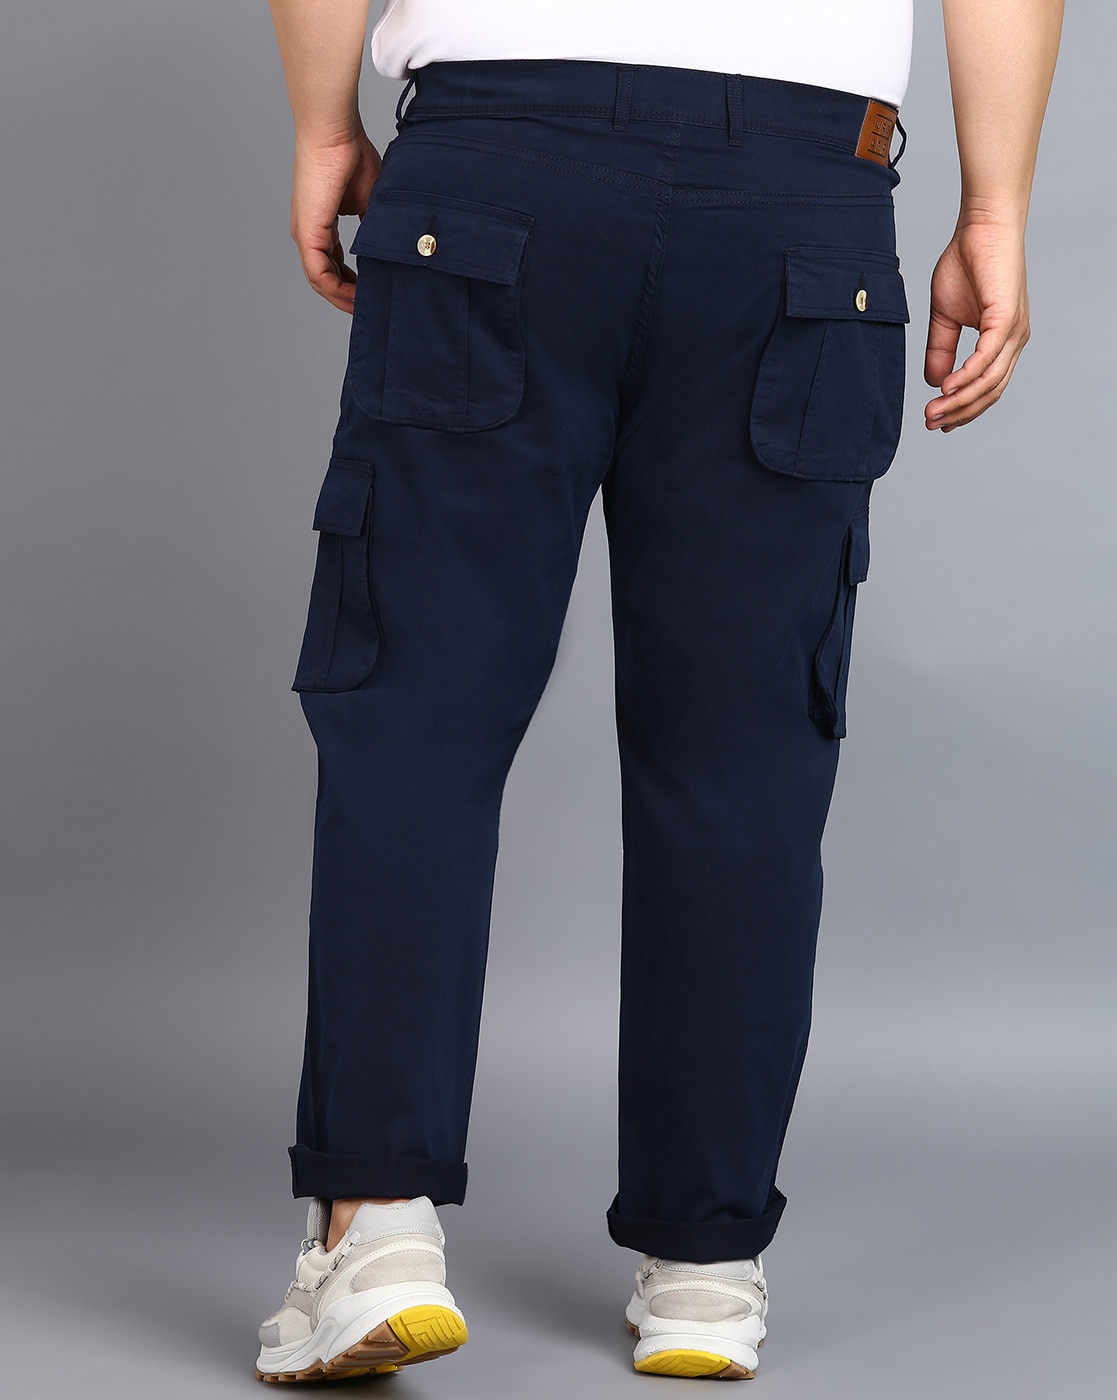 5.11 Tactical Cargo Pants | Curtis - Tools for Heroes